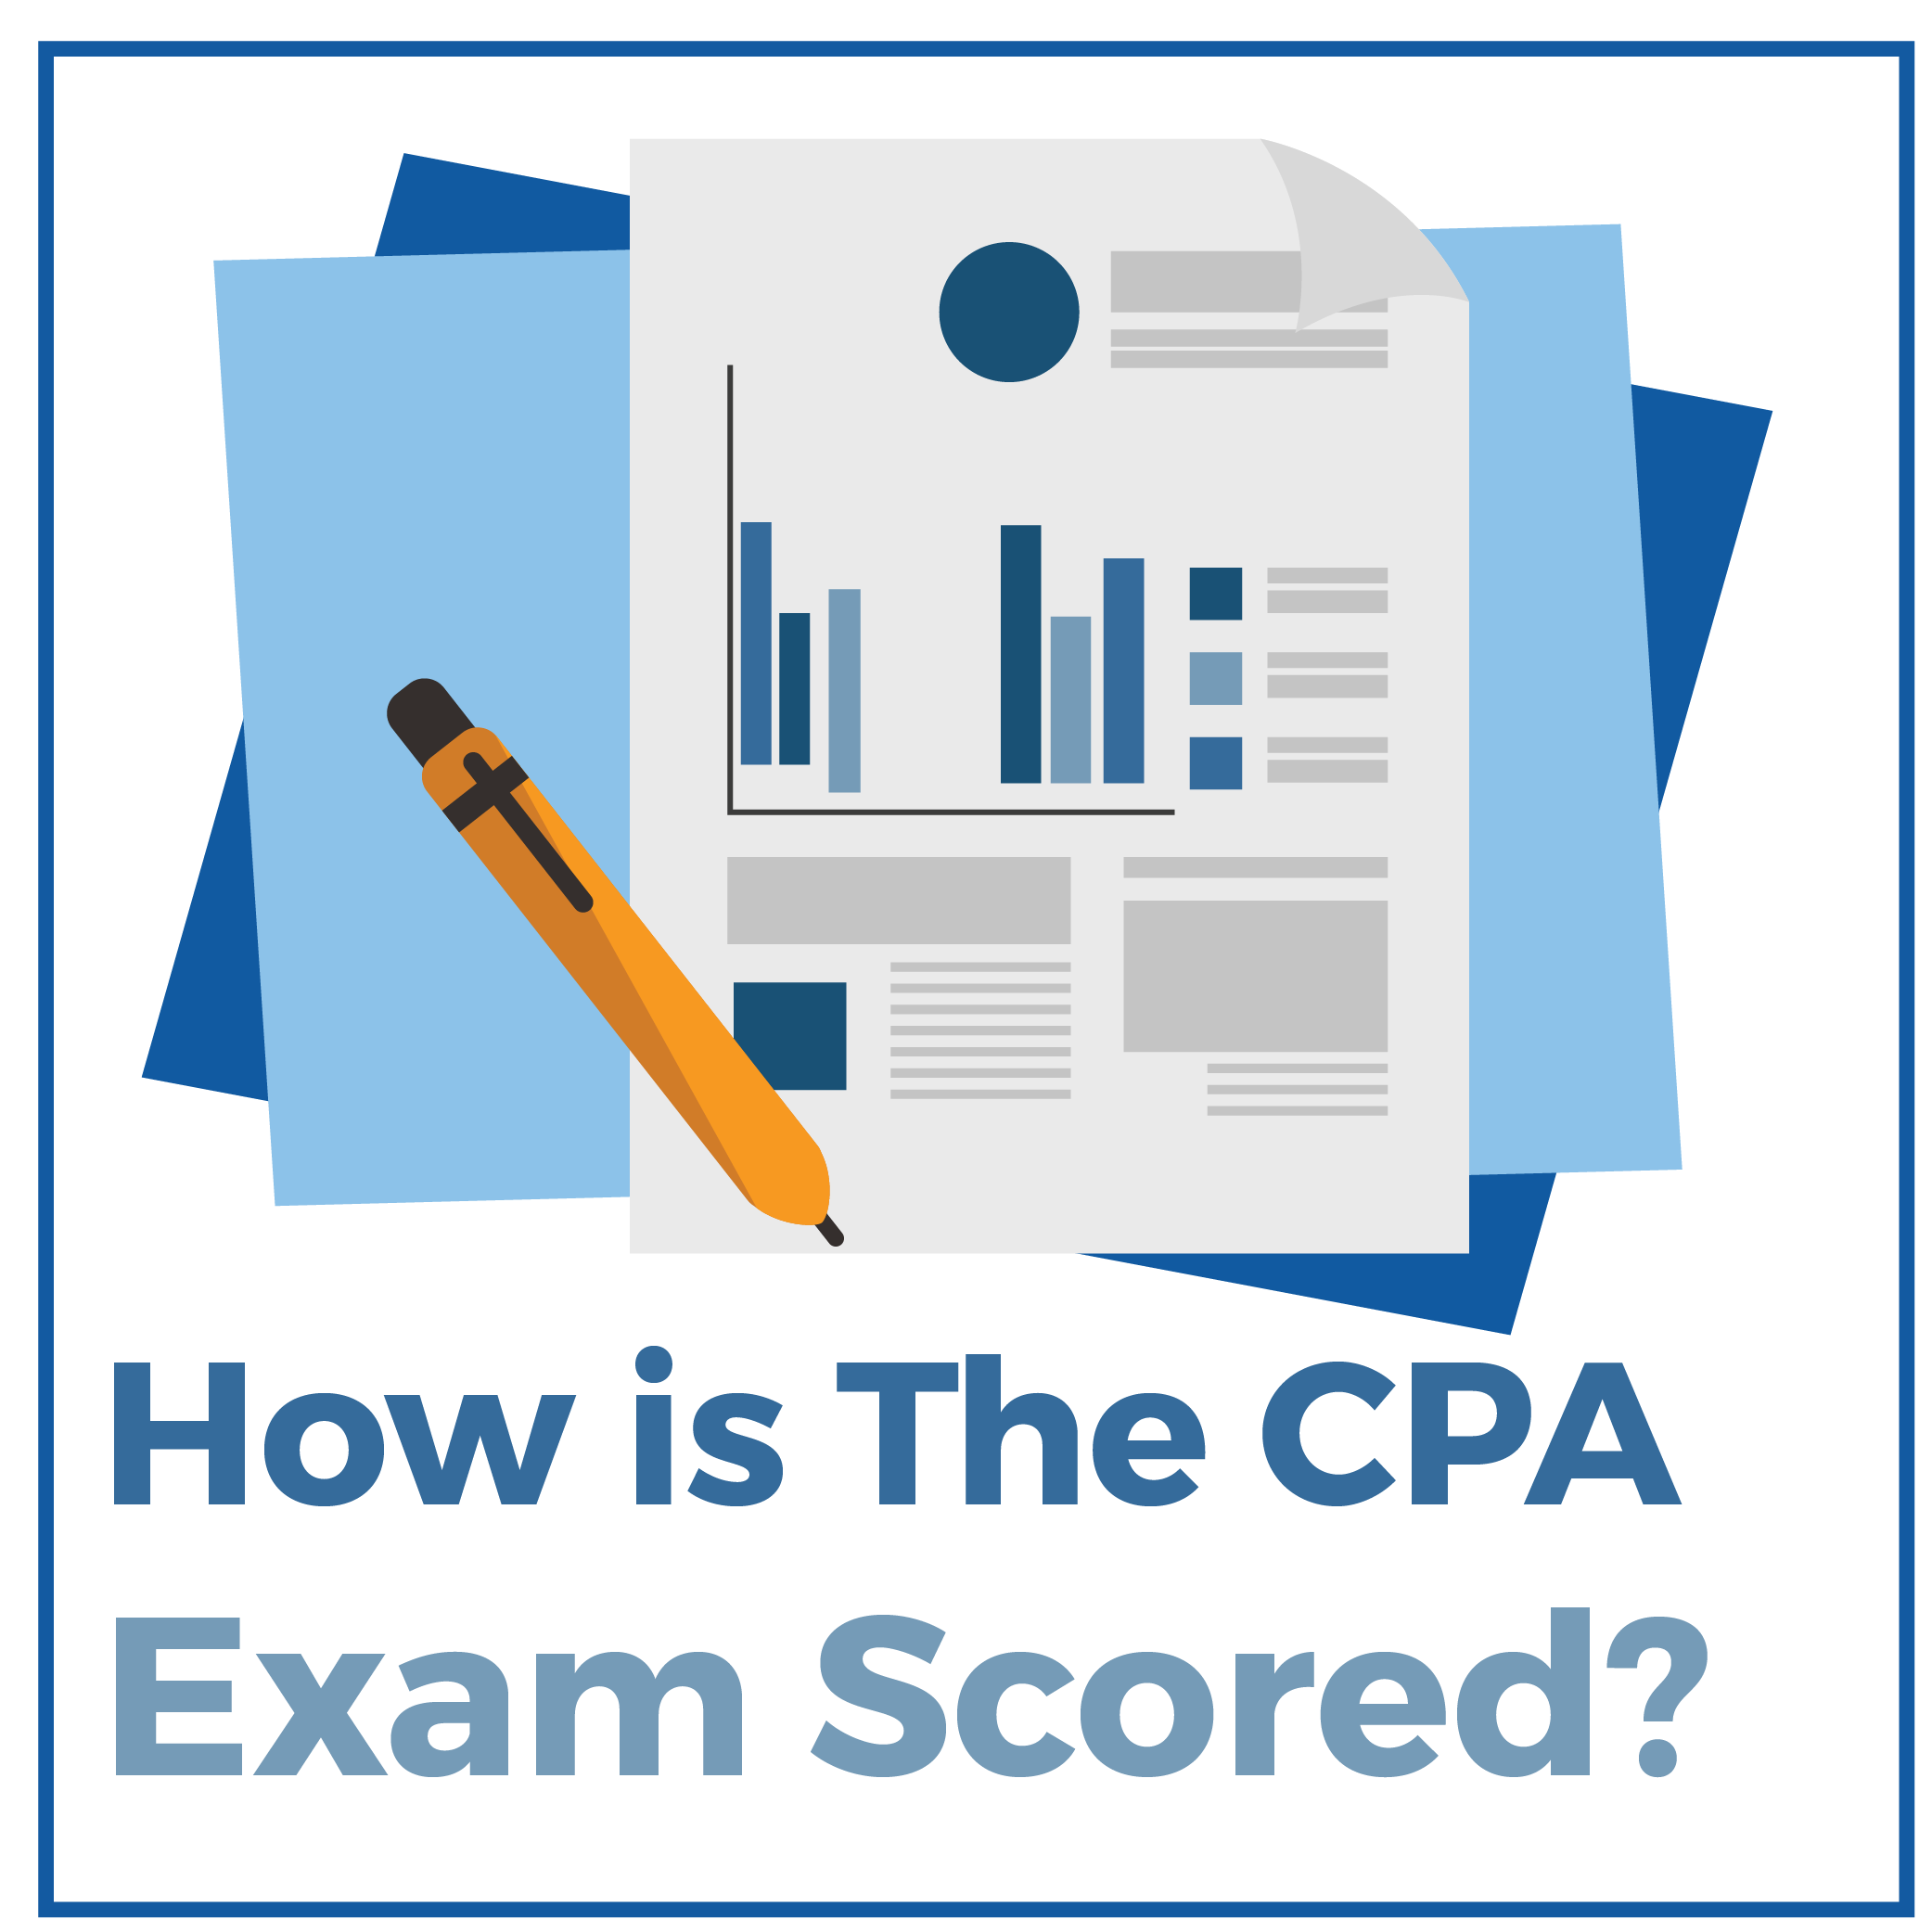 How is The CPA Exam Scored?